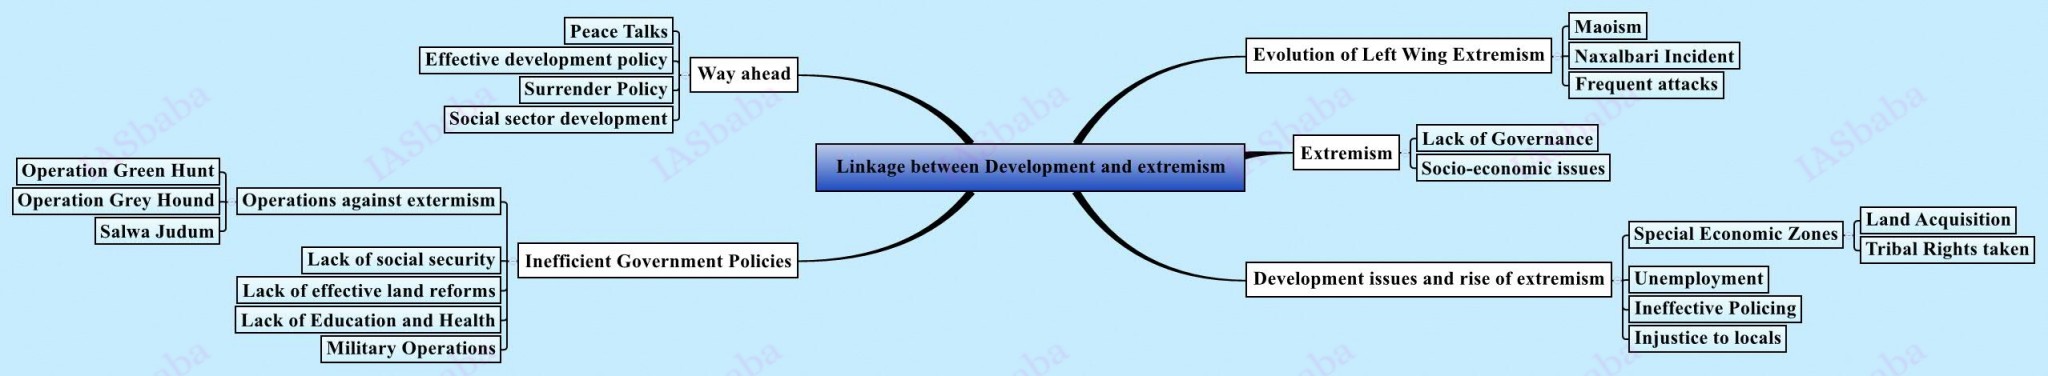 Linkage between Development and extremism